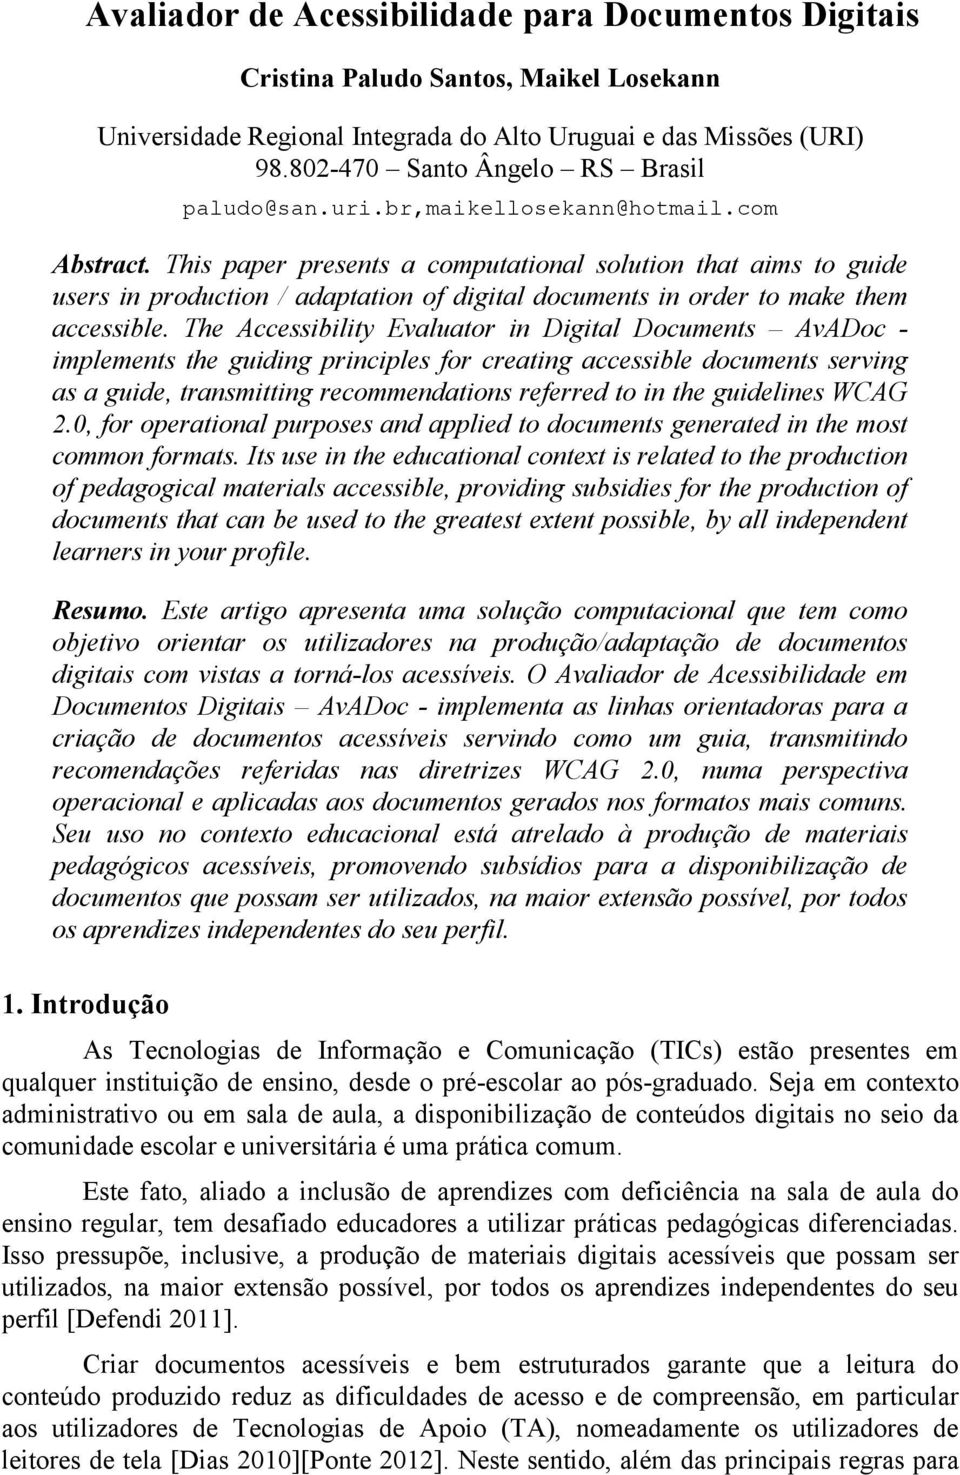 This paper presents a computational solution that aims to guide users in production / adaptation of digital documents in order to make them accessible.